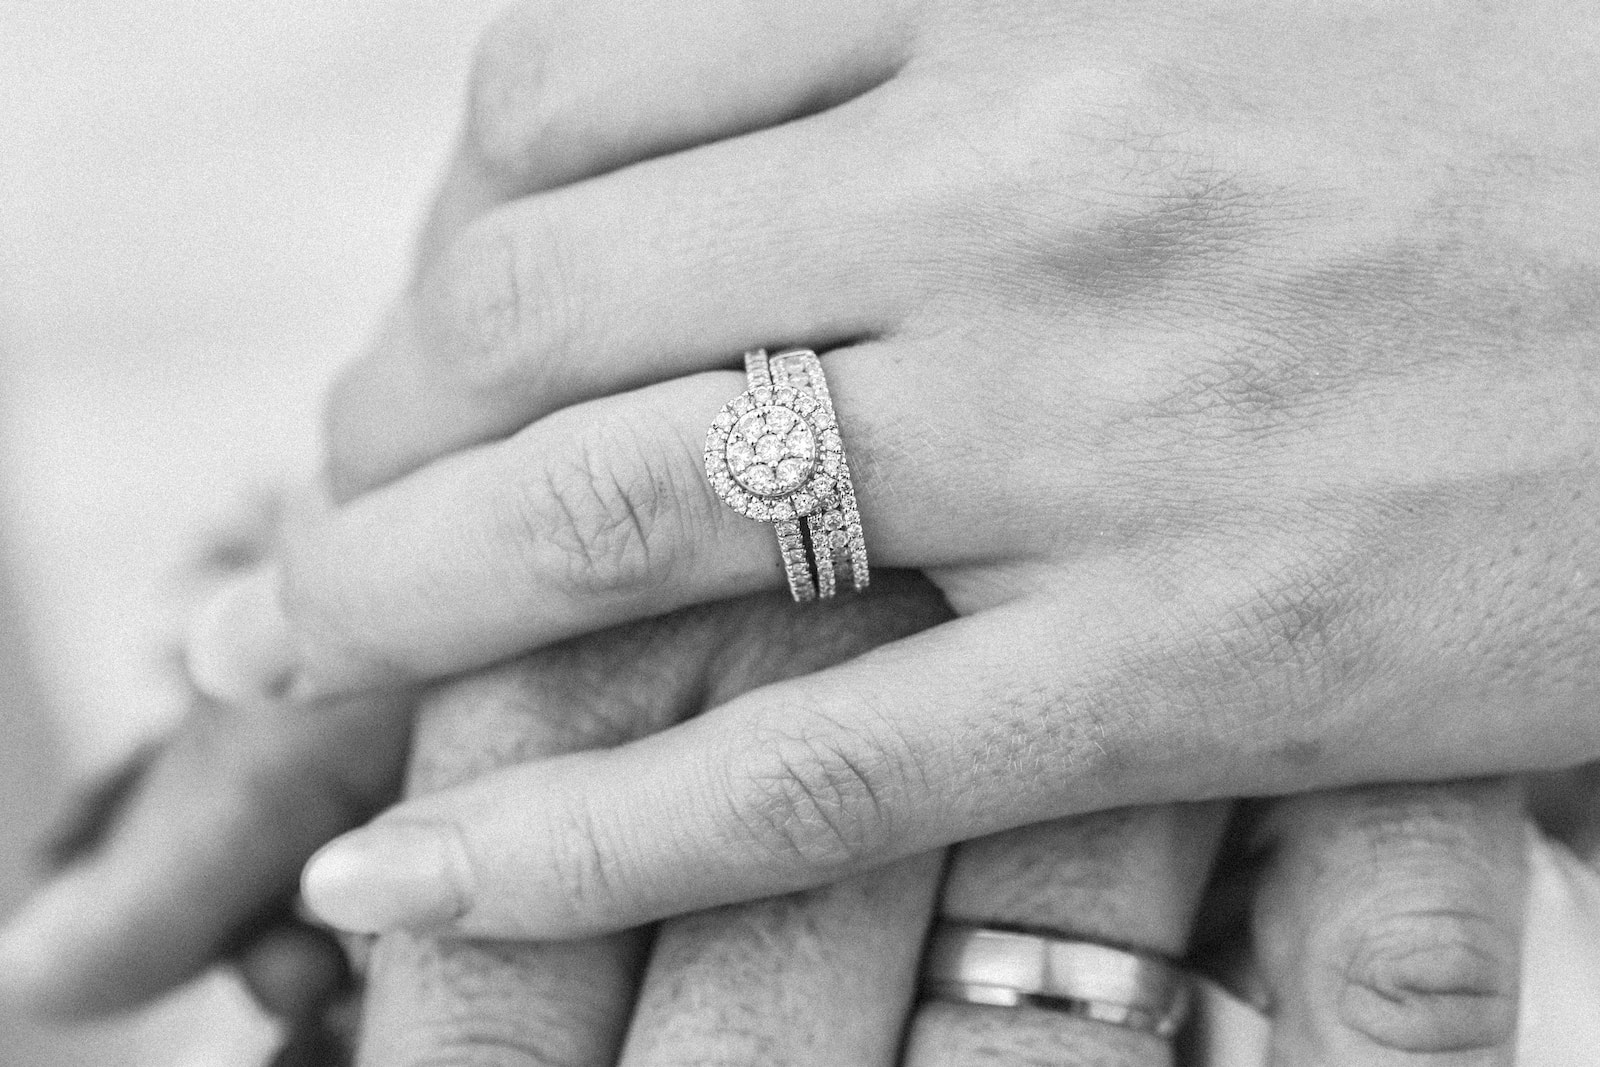 grayscale photo of two hands with rings